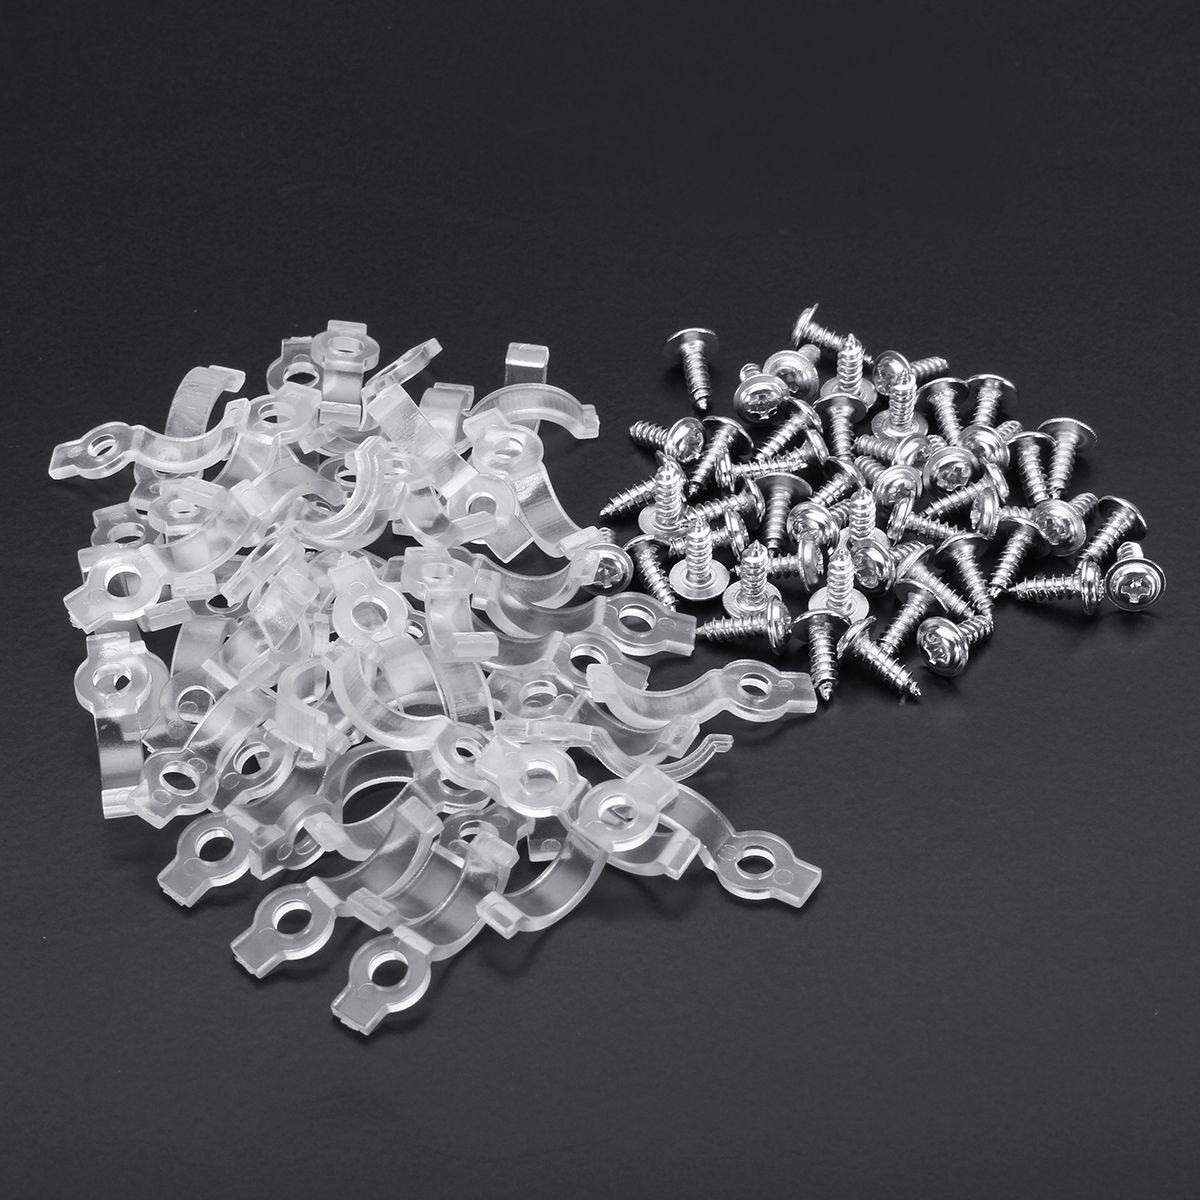 50PCS-8MM-Width-Mounting-Brackets-Fixing-Screw-Clip-for-3528-LED-Strip-Light-1241852